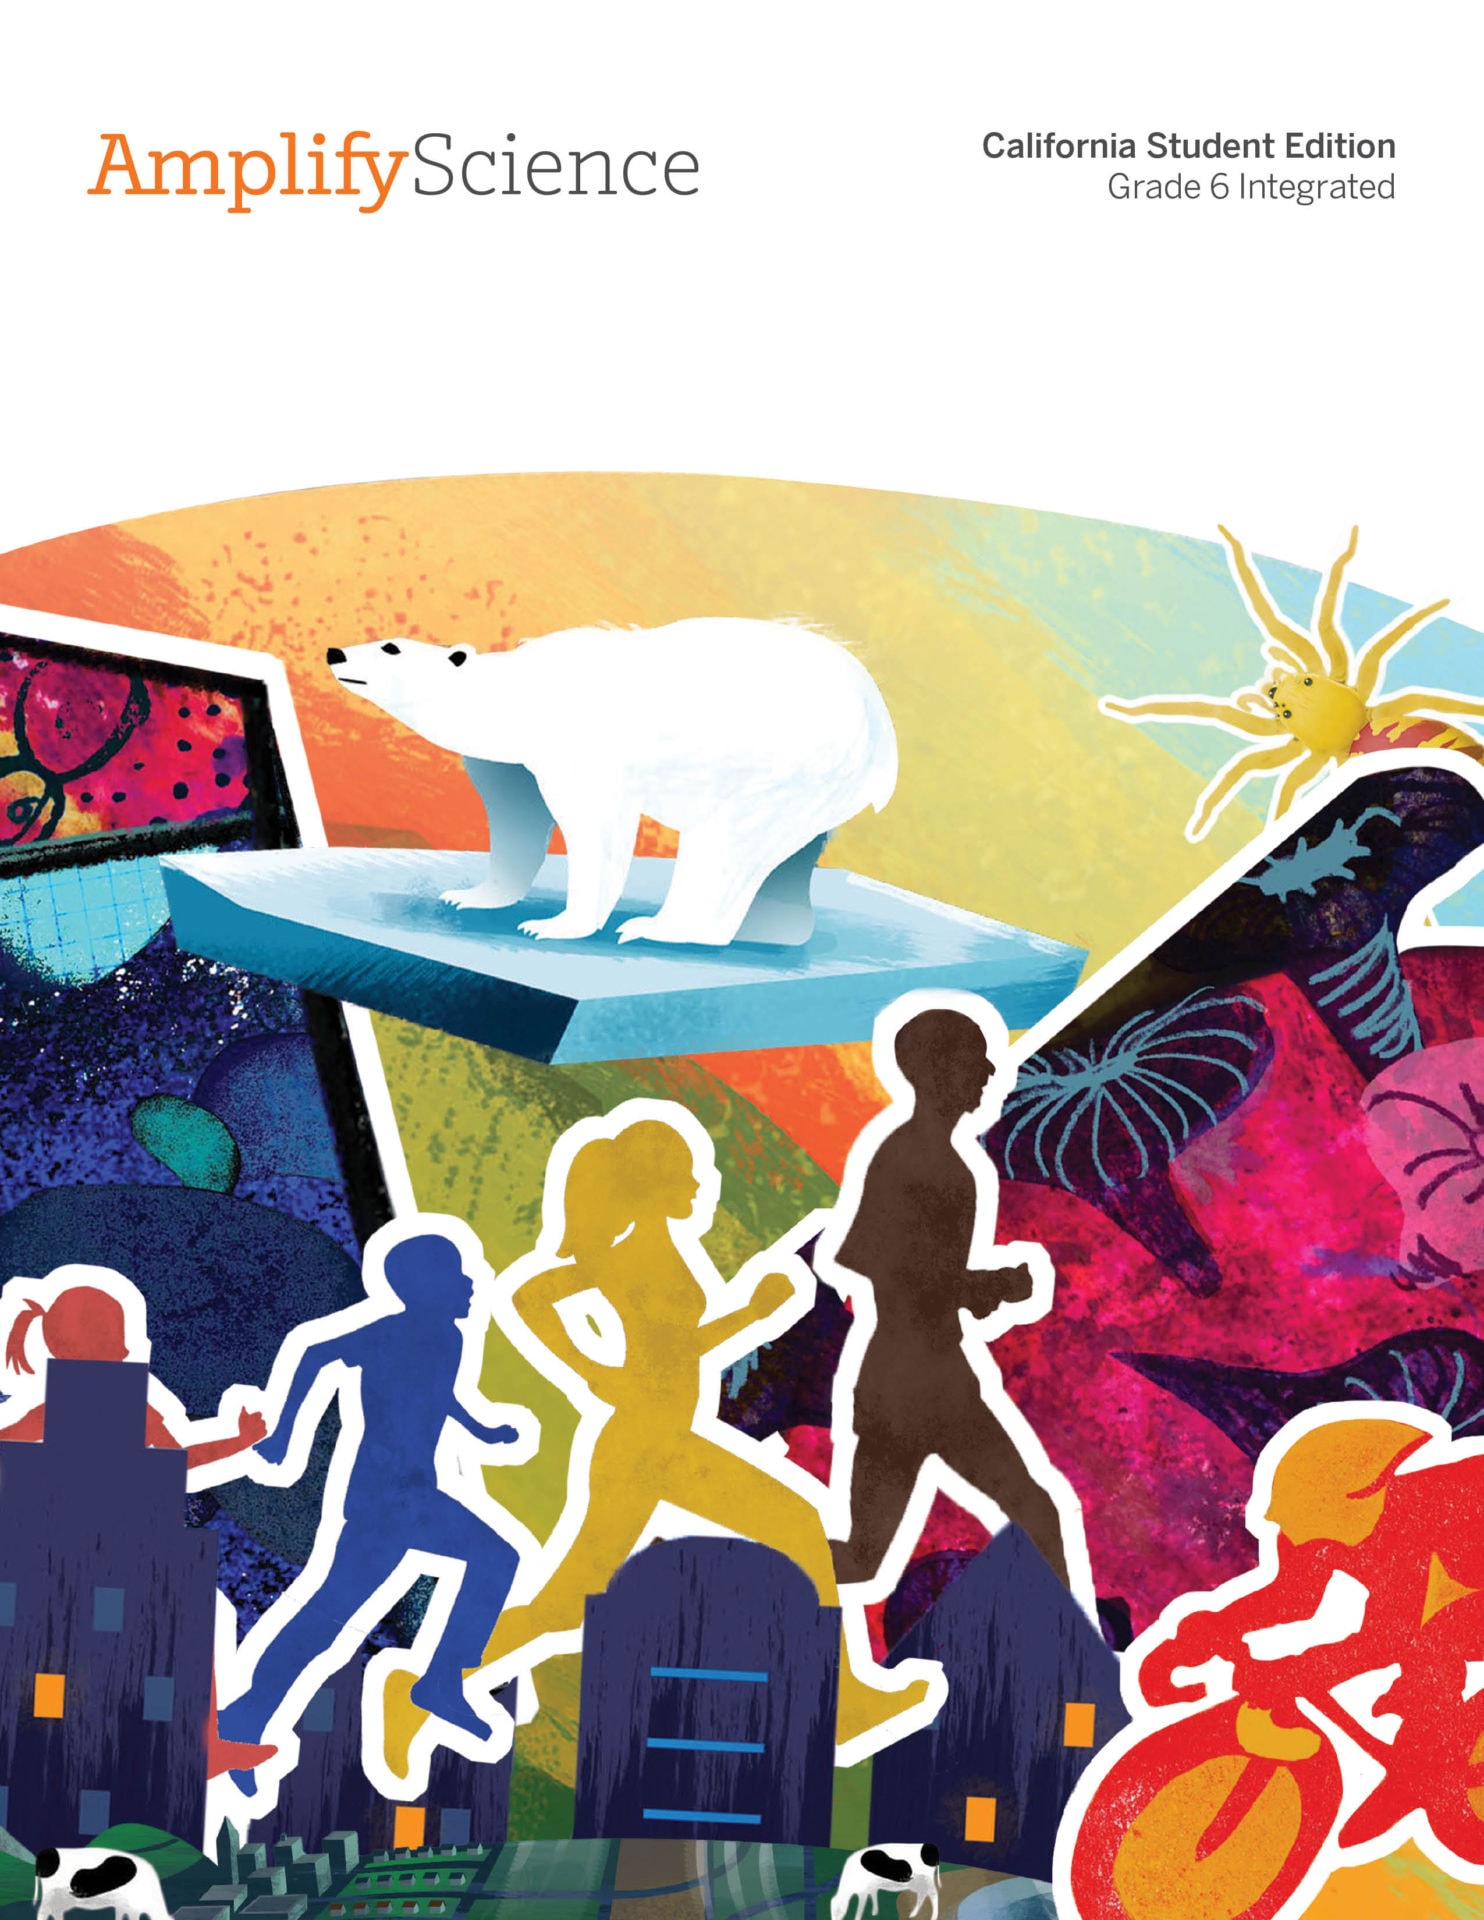 Illustration on a textbook cover featuring a polar bear on an iceberg, silhouettes of running people, cityscape, sun, and tropical plants, titled 